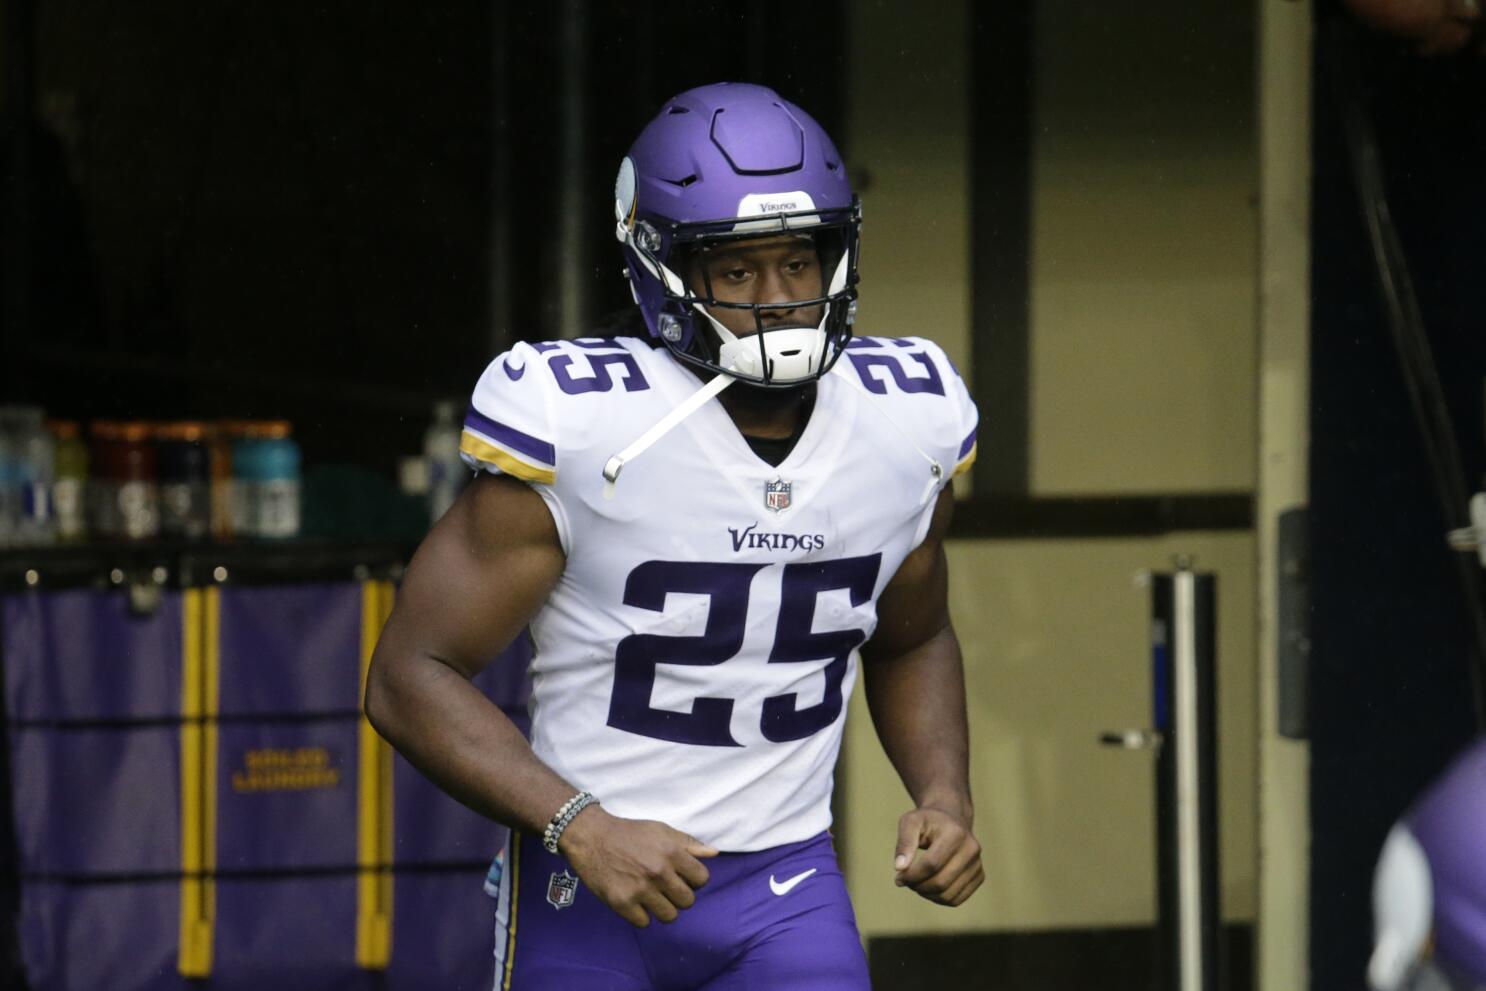 With no sign of Dalvin Cook, it looks Alexander Mattison will lead Vikings